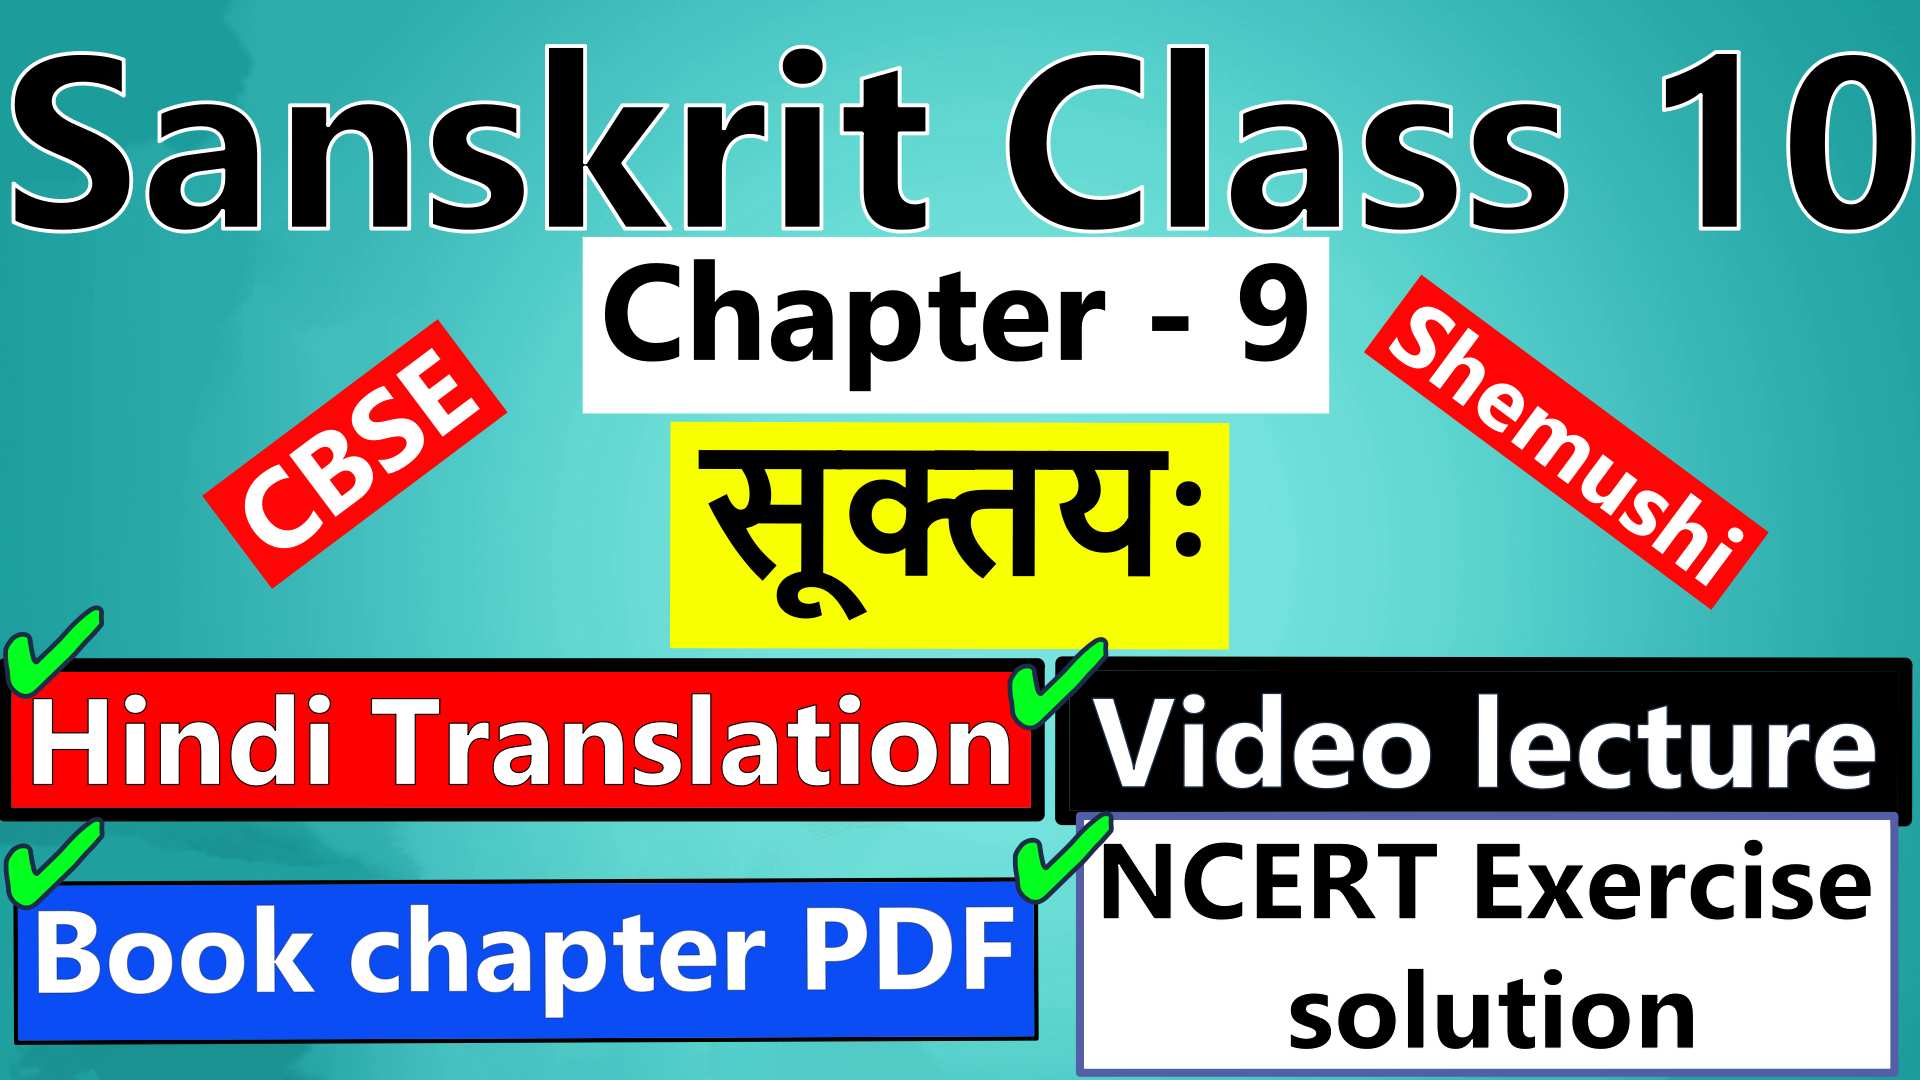 sanskrit-class-10-chapter-9-सूक्तयः-Hindi-Translation-Video-lecture-NCERT-Exercise-Solution-Question-Answer-Book-chapter-PDF